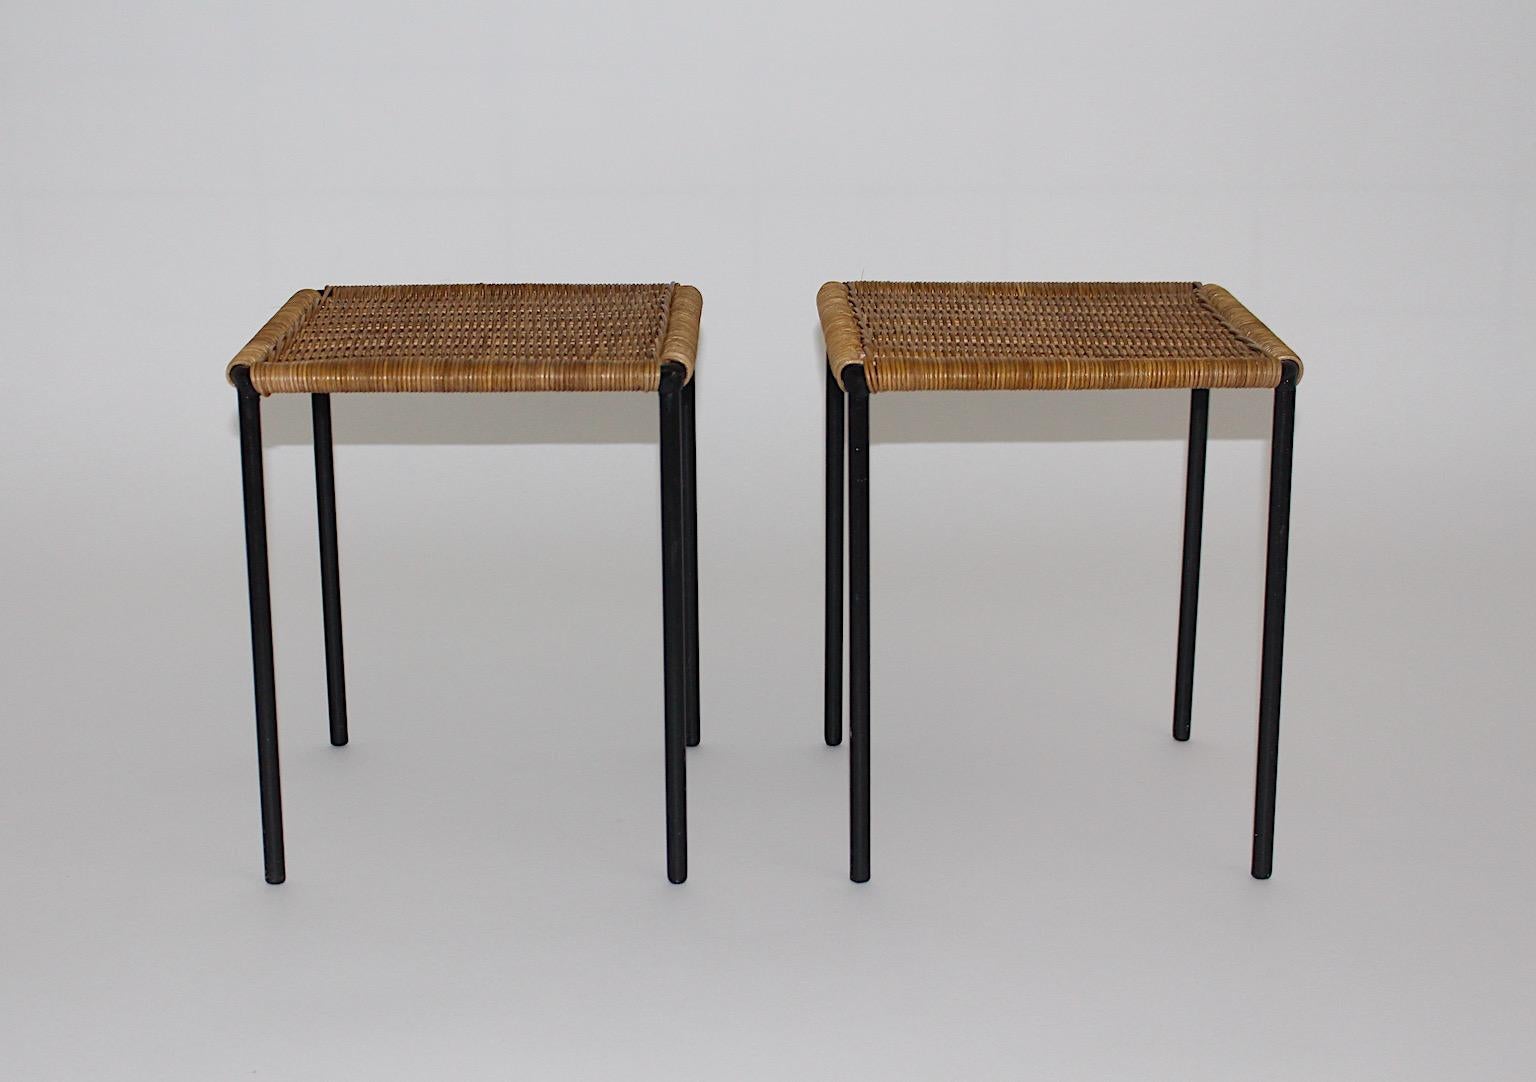 Mid Century Modern vintage authentic duo pair of organic rectangular side tables or sofa tables from rattan and black lacquered metal by Carl Auböck, 1950s Austria.
A pair of tables or sofa tables, which show rattan network and black lacquered